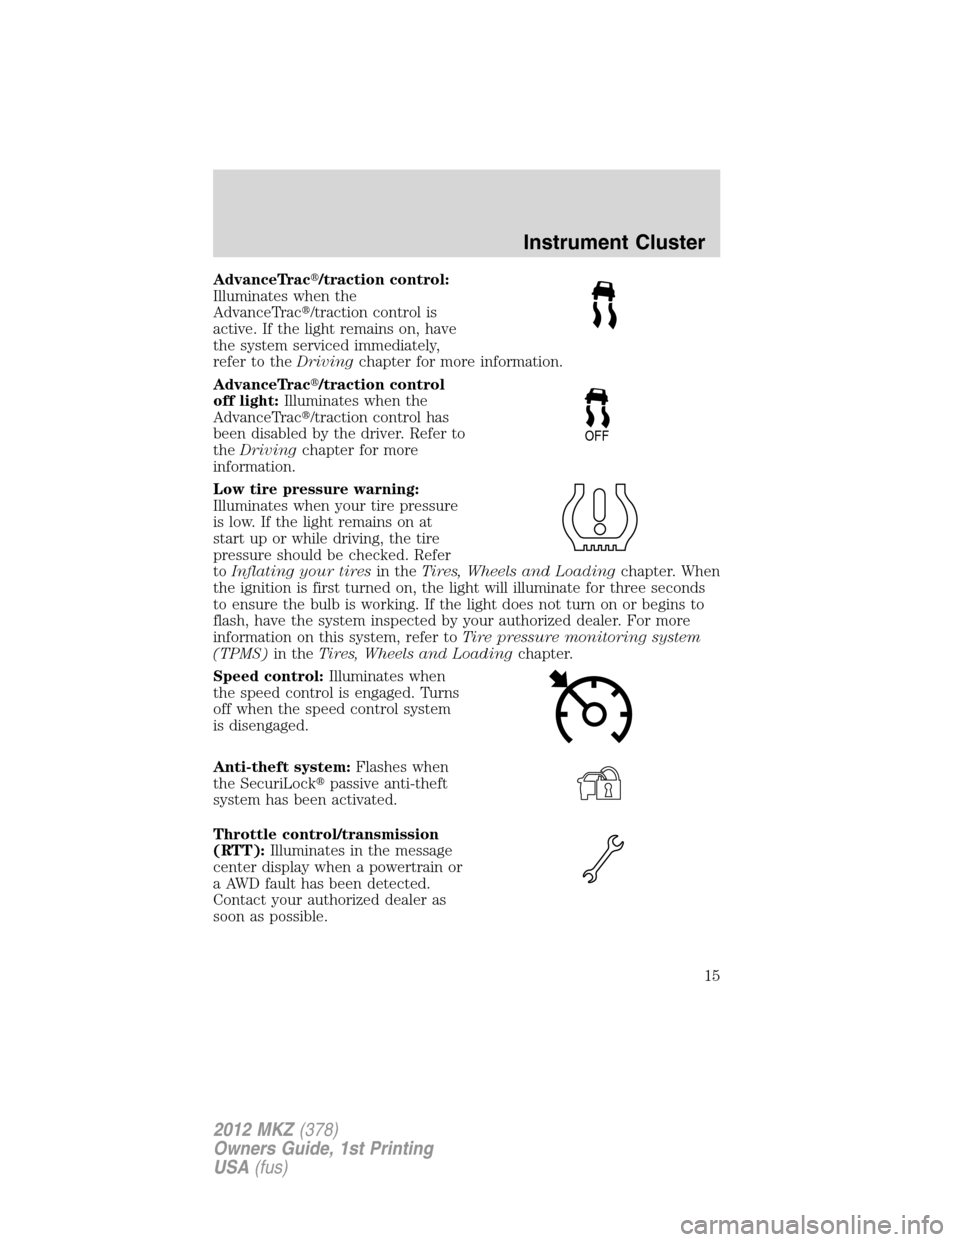 LINCOLN MKZ 2012  Owners Manual AdvanceTrac/traction control:
Illuminates when the
AdvanceTrac/traction control is
active. If the light remains on, have
the system serviced immediately,
refer to theDrivingchapter for more informat